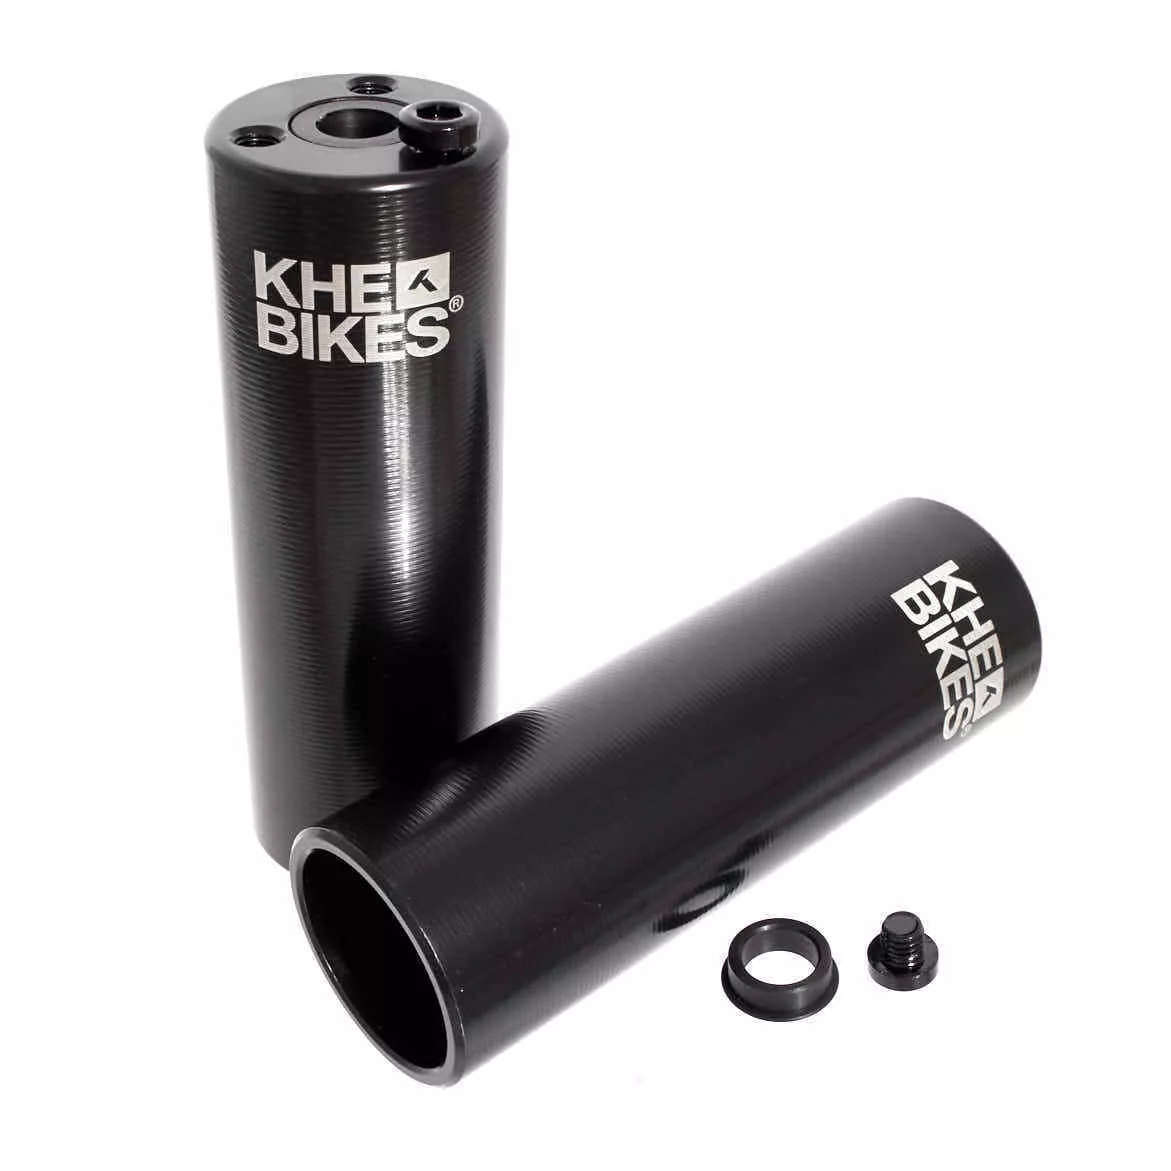 BMX Pegs KHE LASER PRO 1 pair suitable for 10 mm and 14 mm